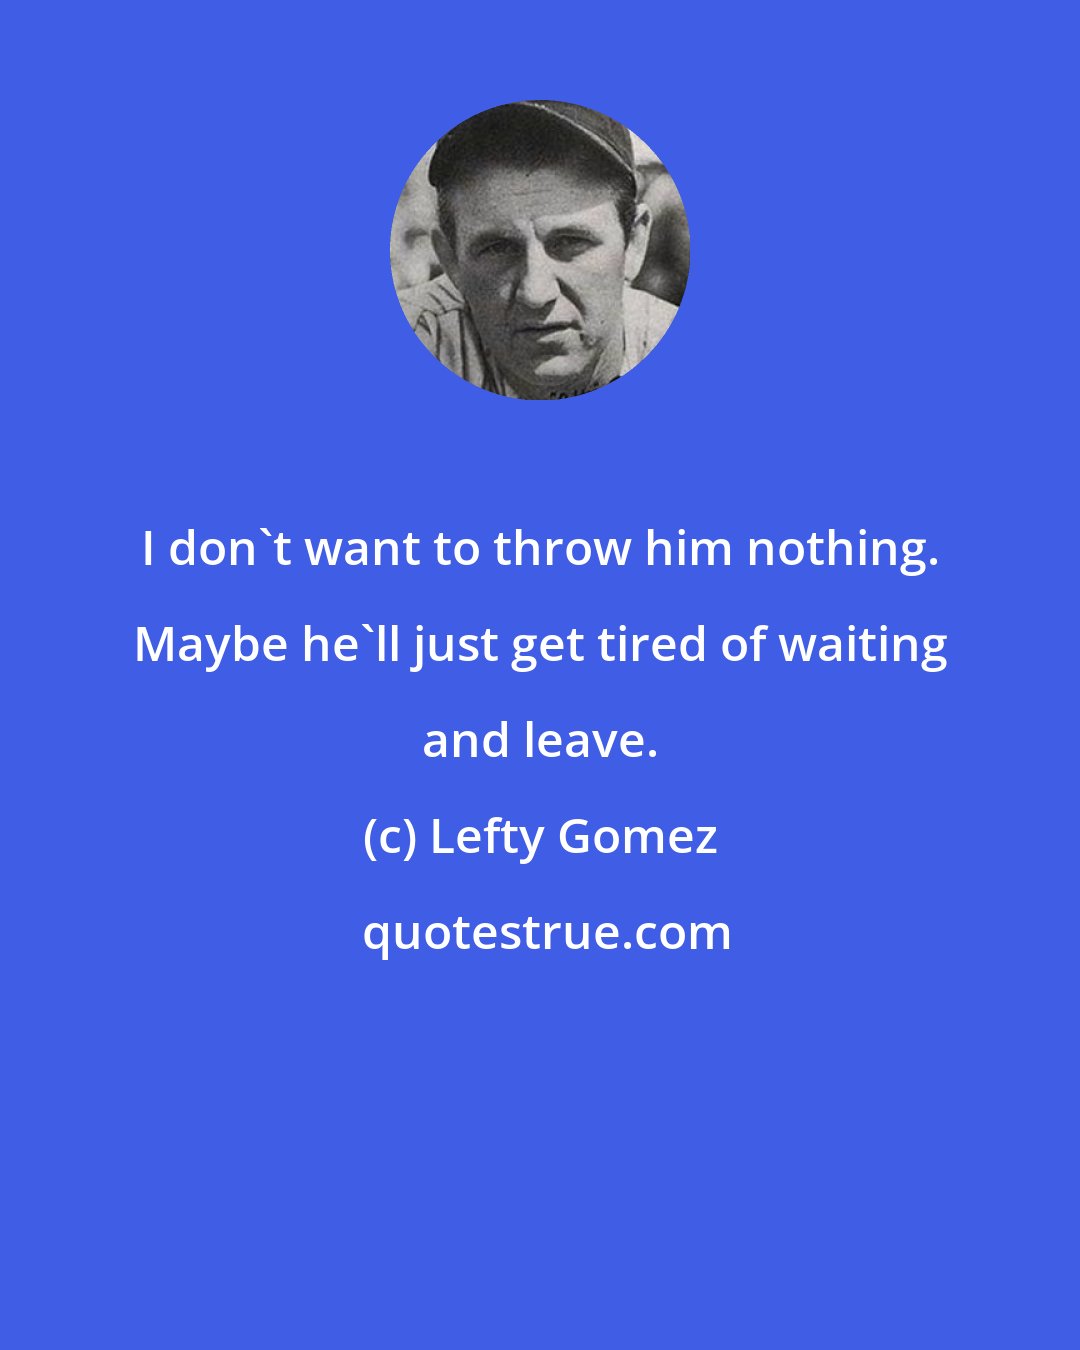 Lefty Gomez: I don't want to throw him nothing. Maybe he'll just get tired of waiting and leave.